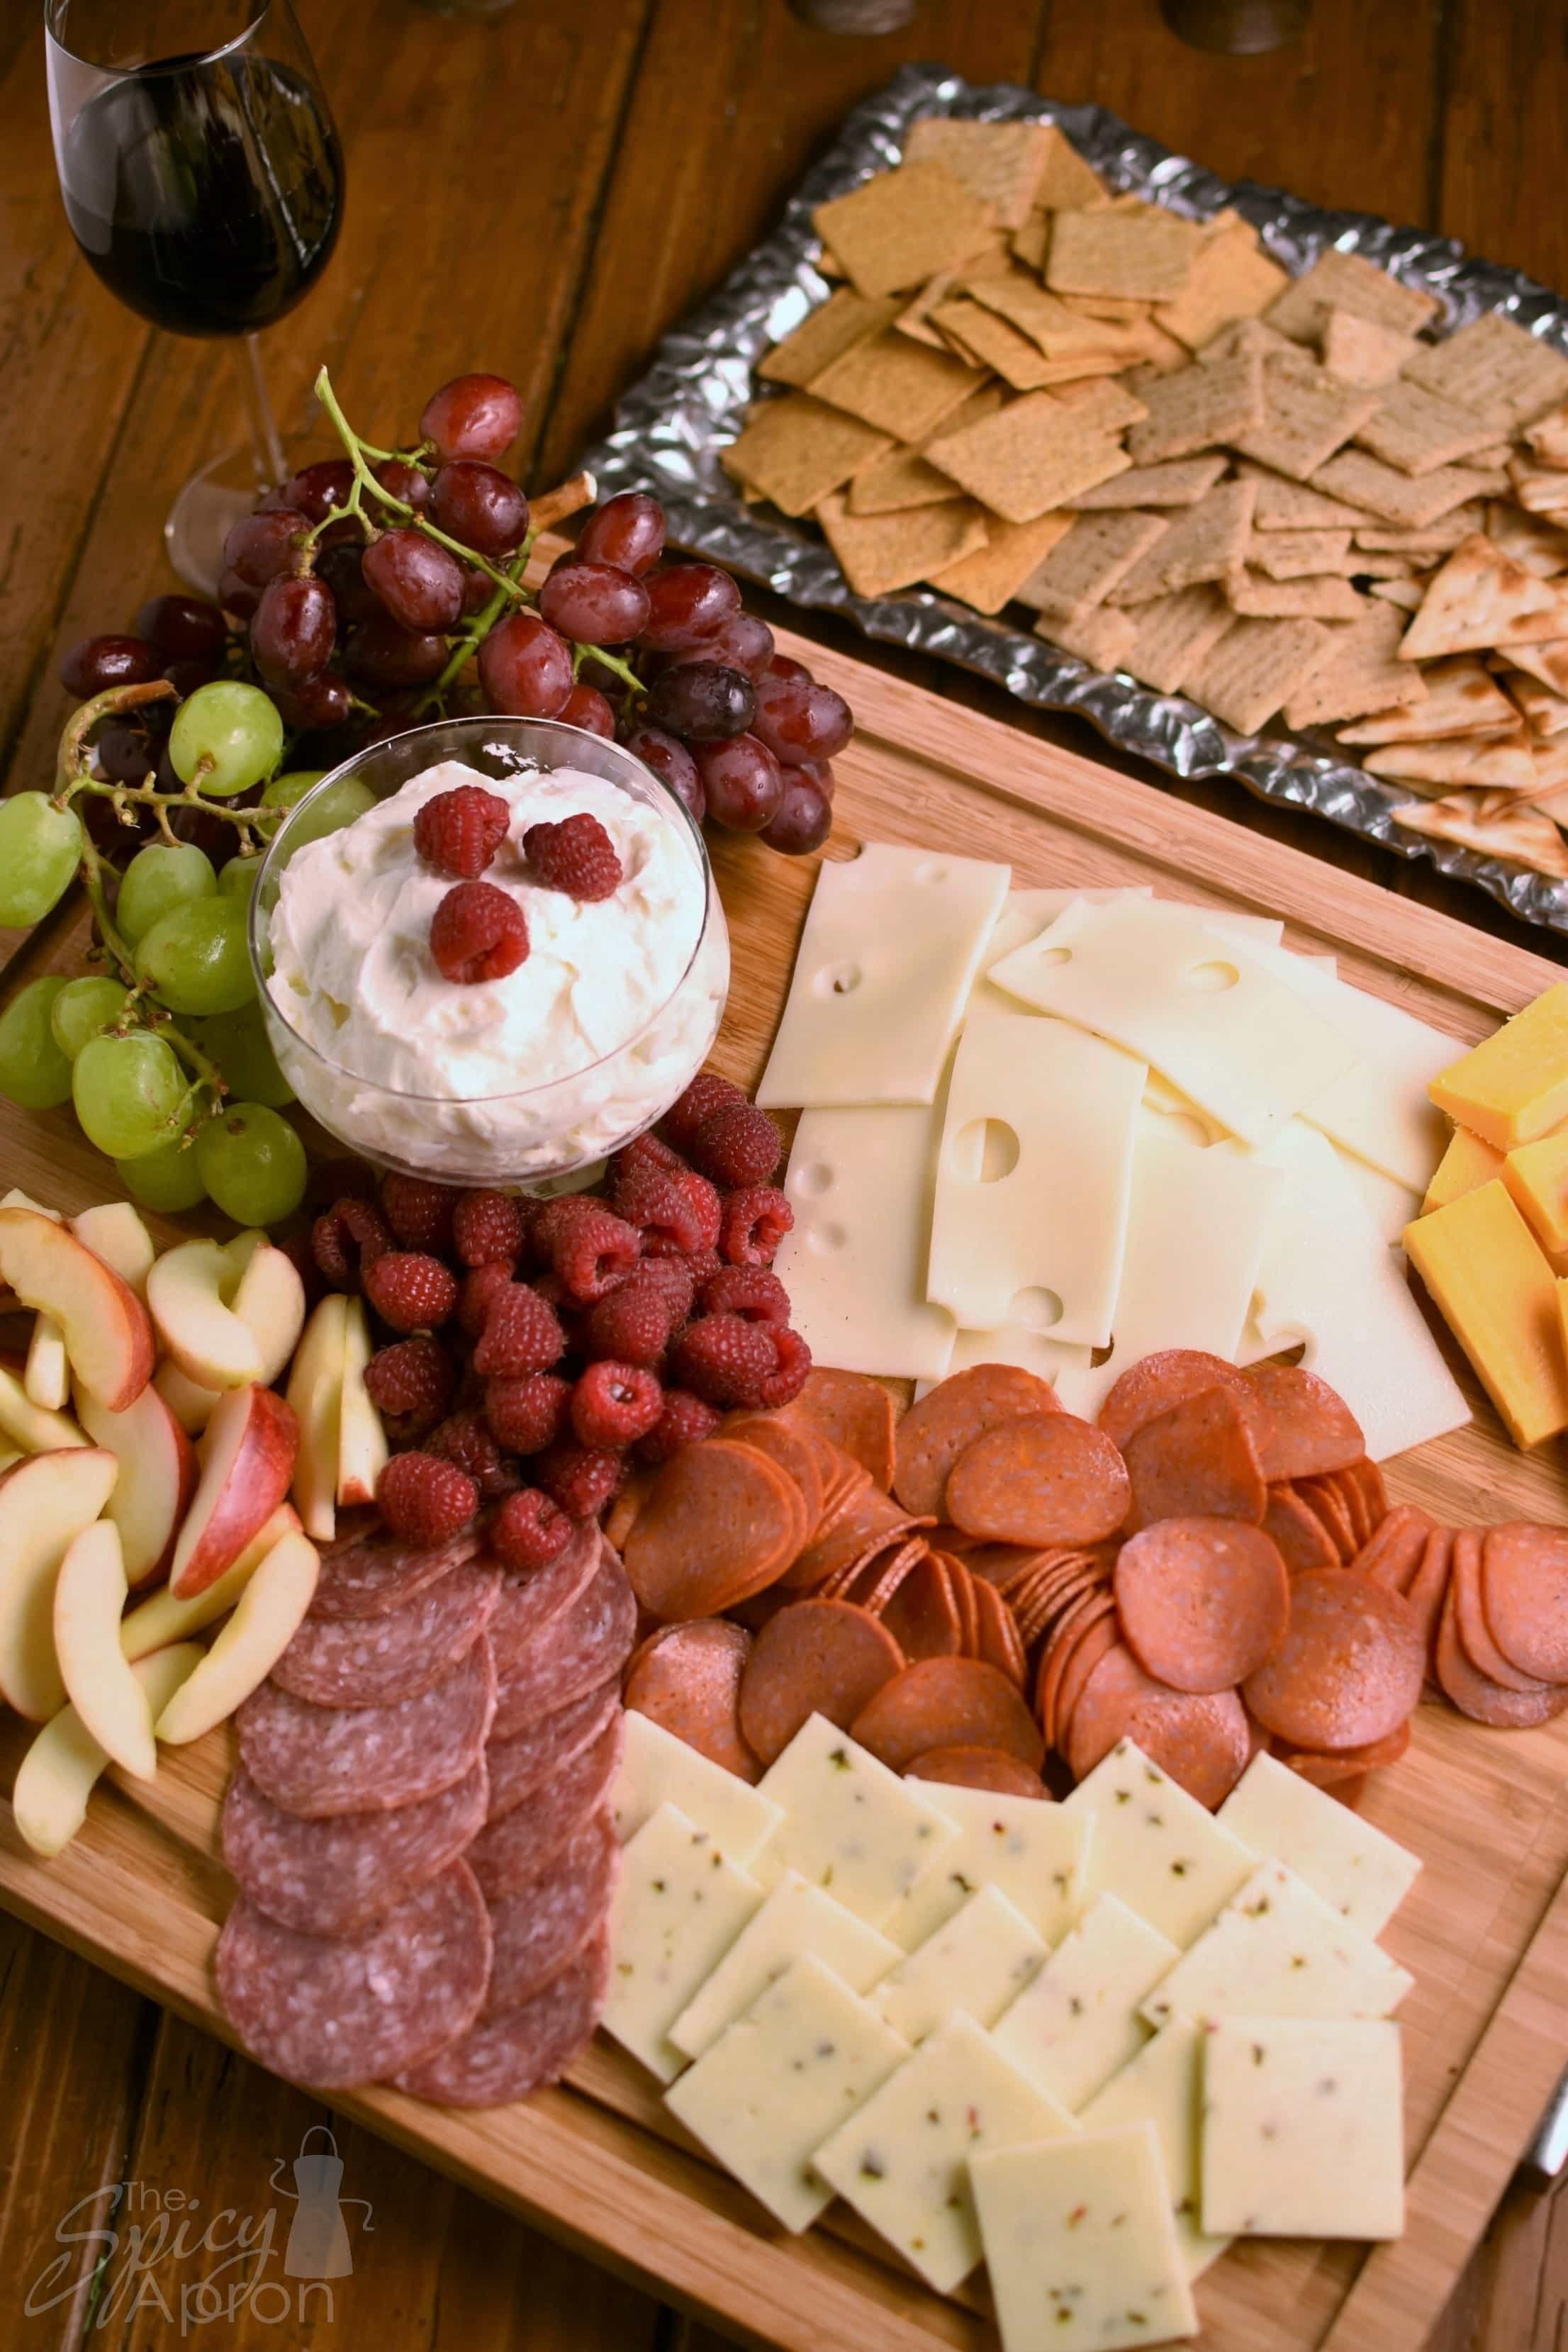 10 Unique Meat And Cheese Tray Ideas meat and cheese platter with fruit and dip the spicy apron 2023